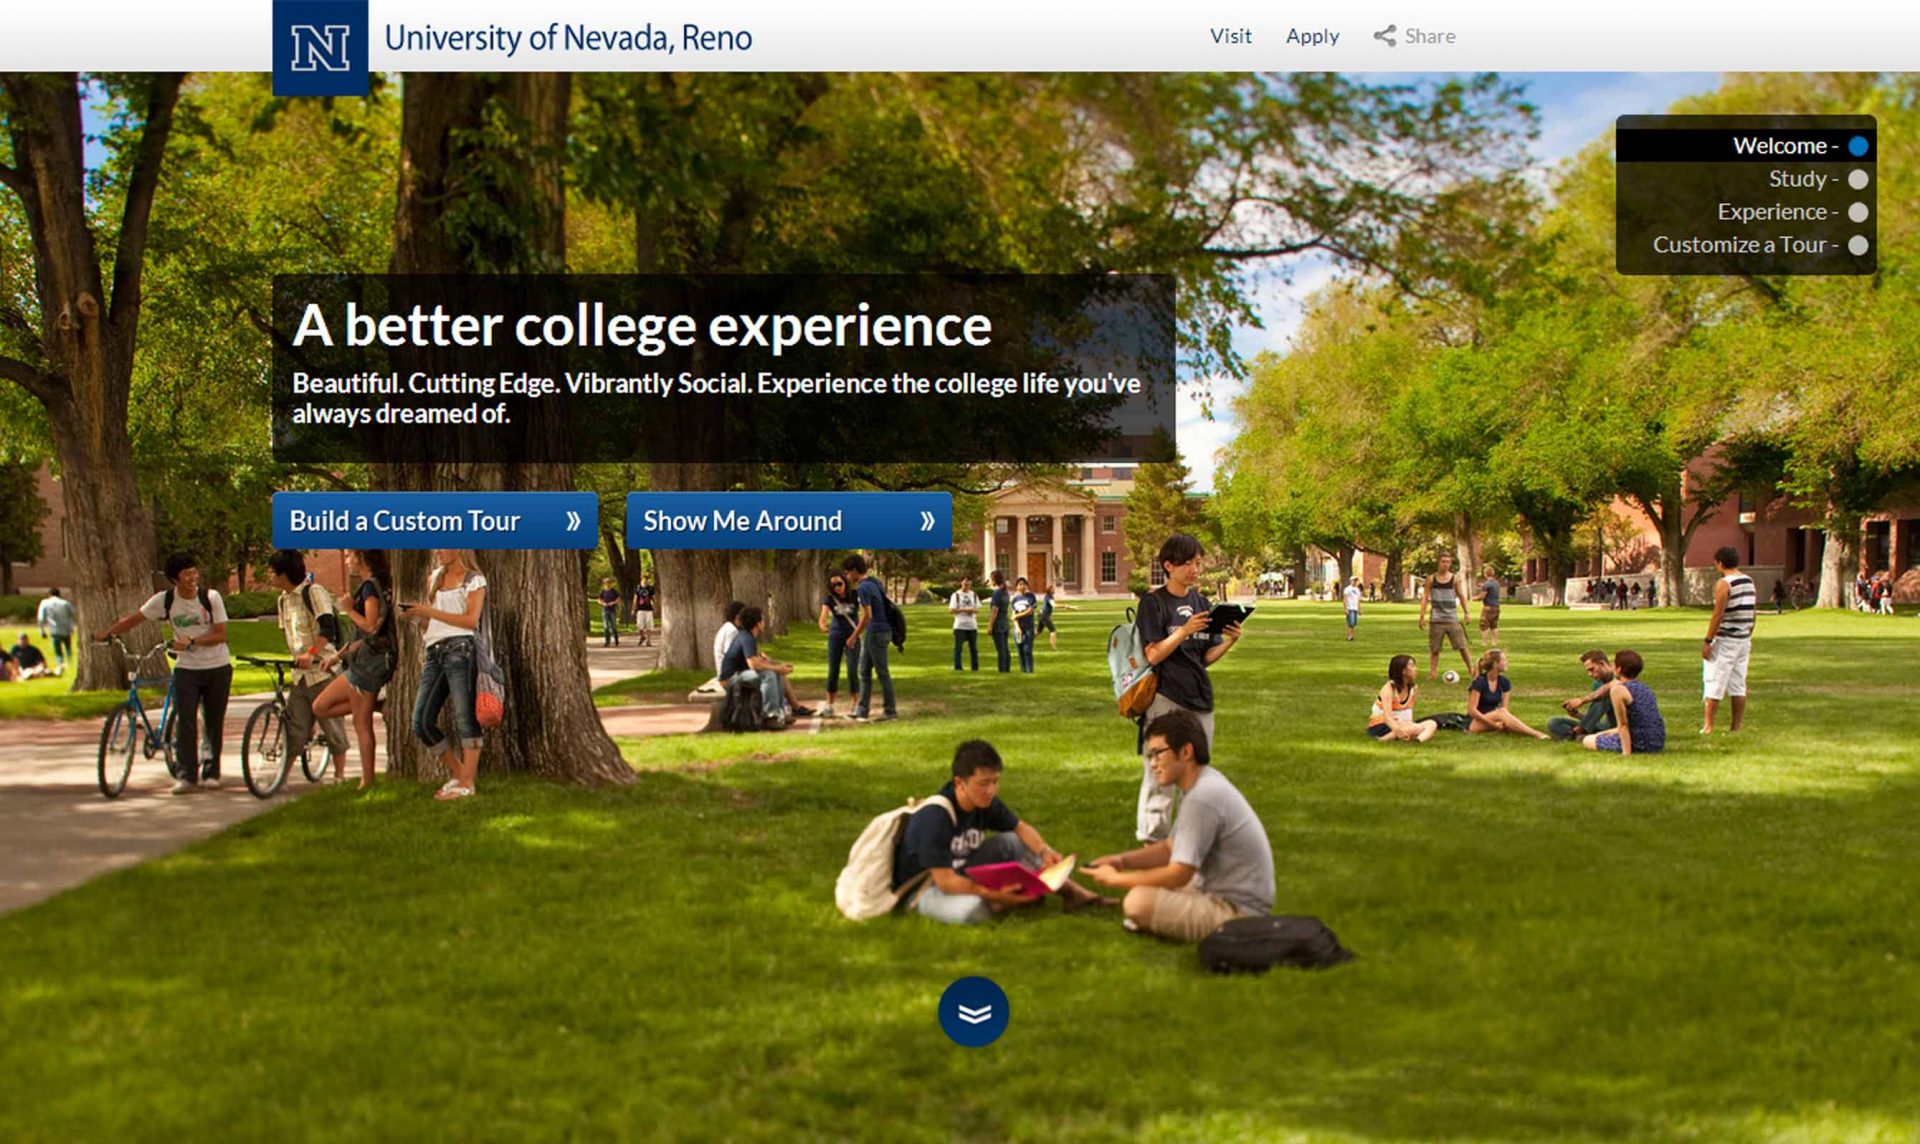 Personalizing the University Experience